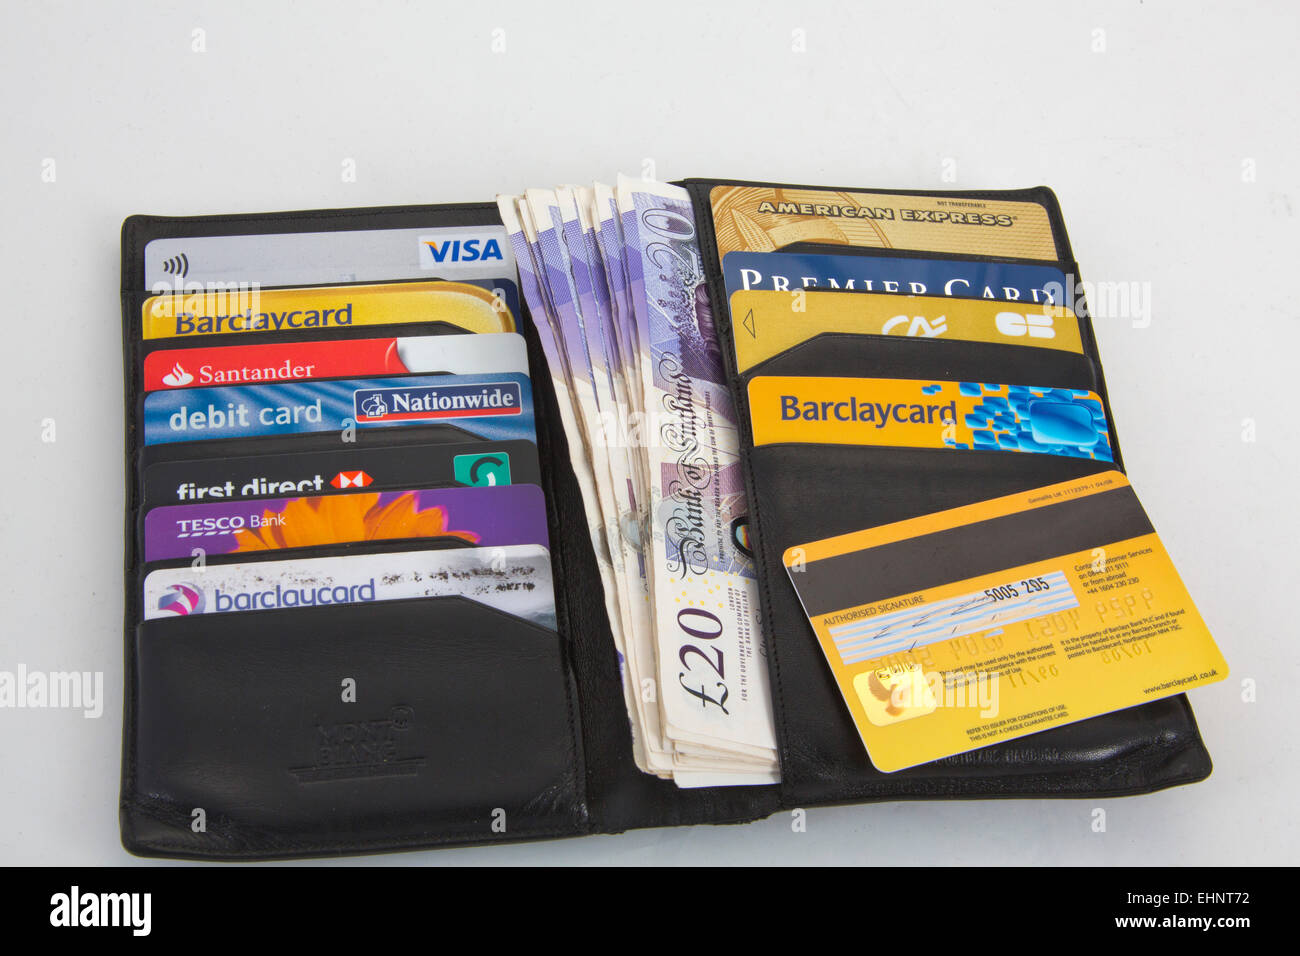 Black wallet with Assortment of credit cards Visa and American express 151143 Credit Cards Stock Photo